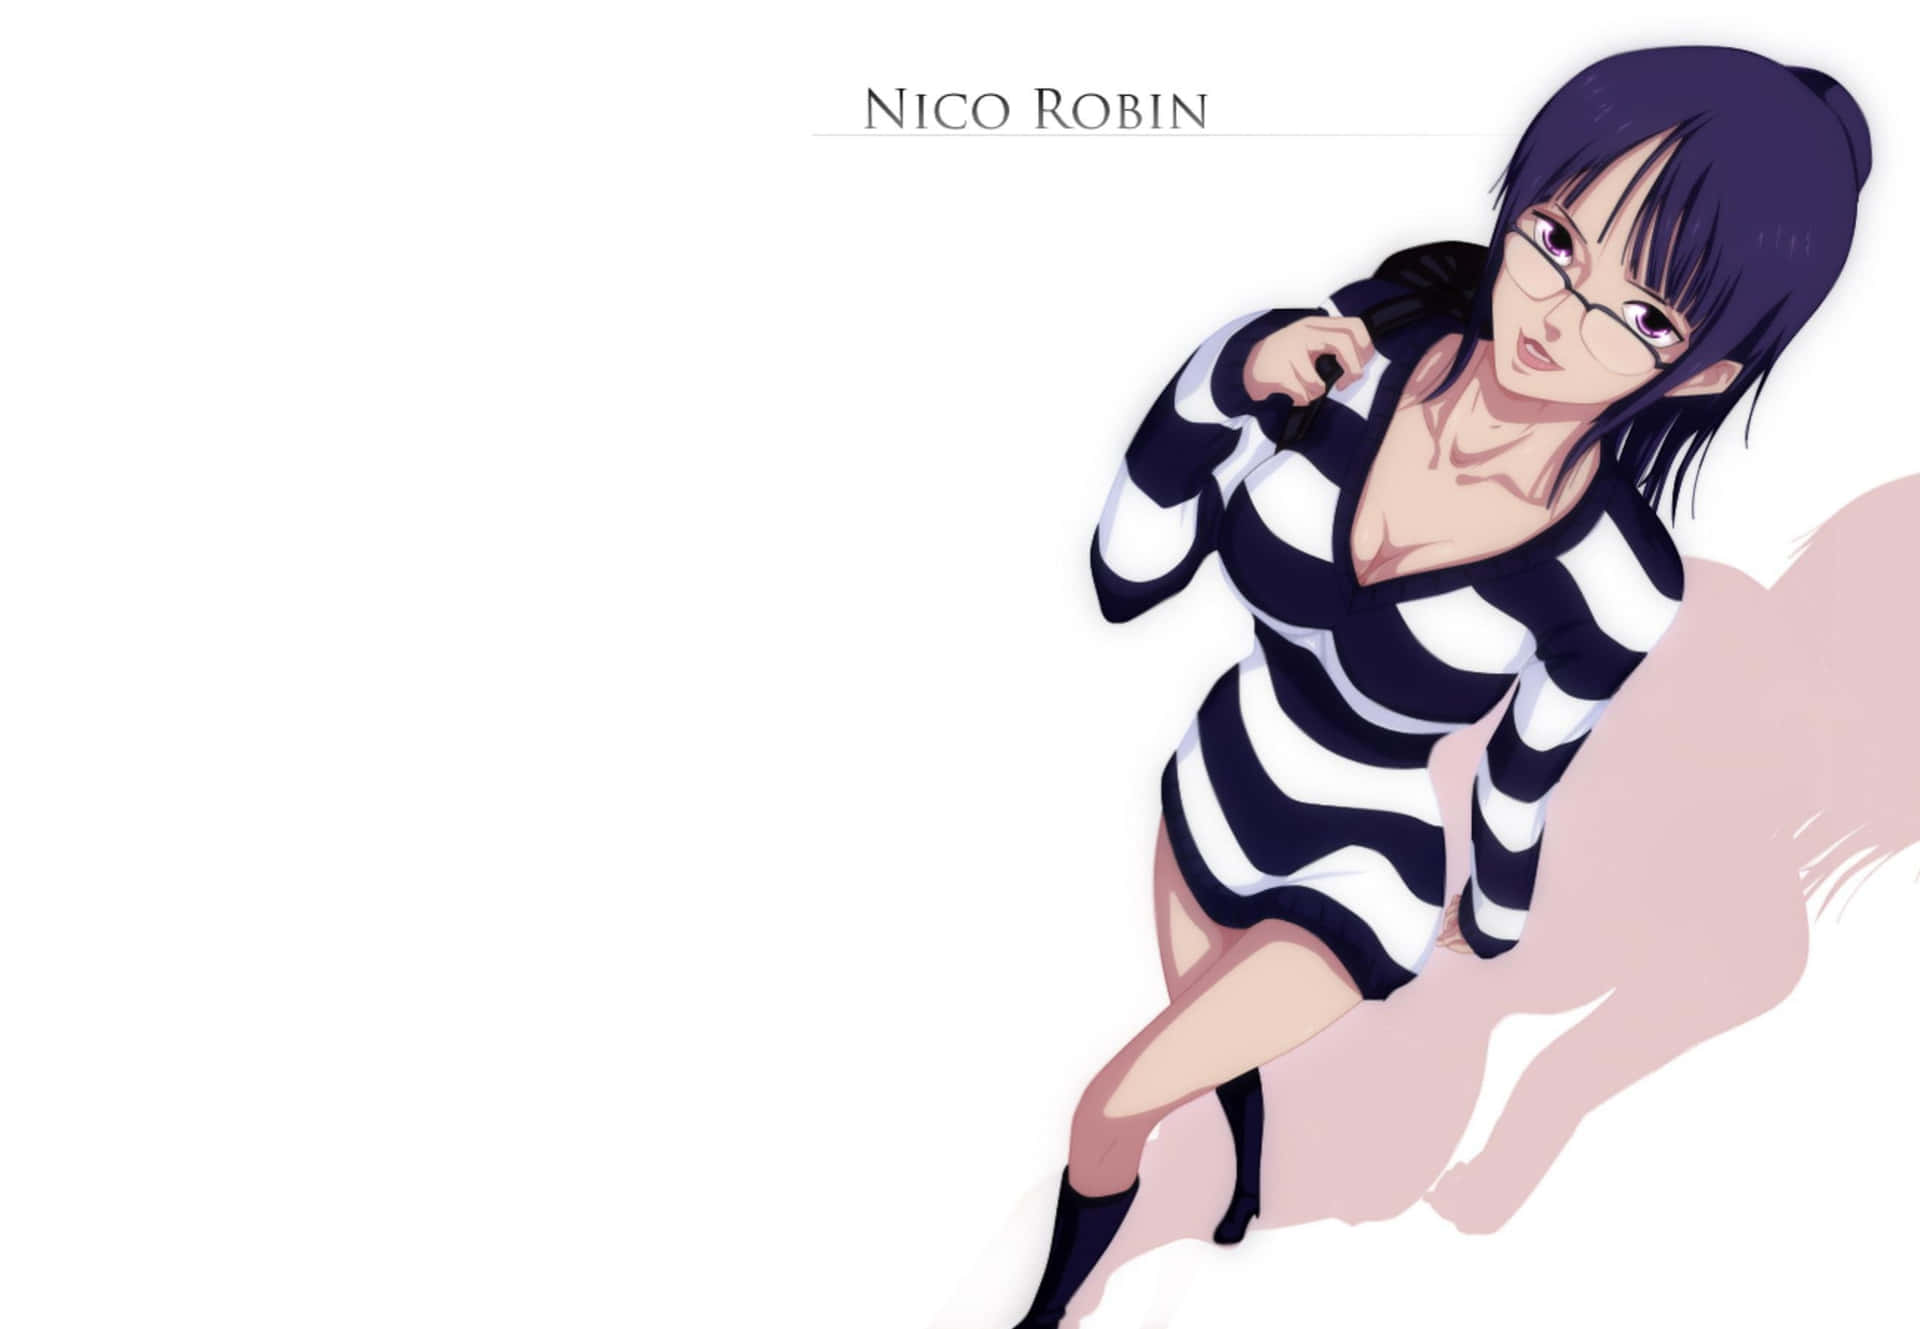 Nico Robin, a brave and fearless warrior of the Straw Hat Pirates. Wallpaper